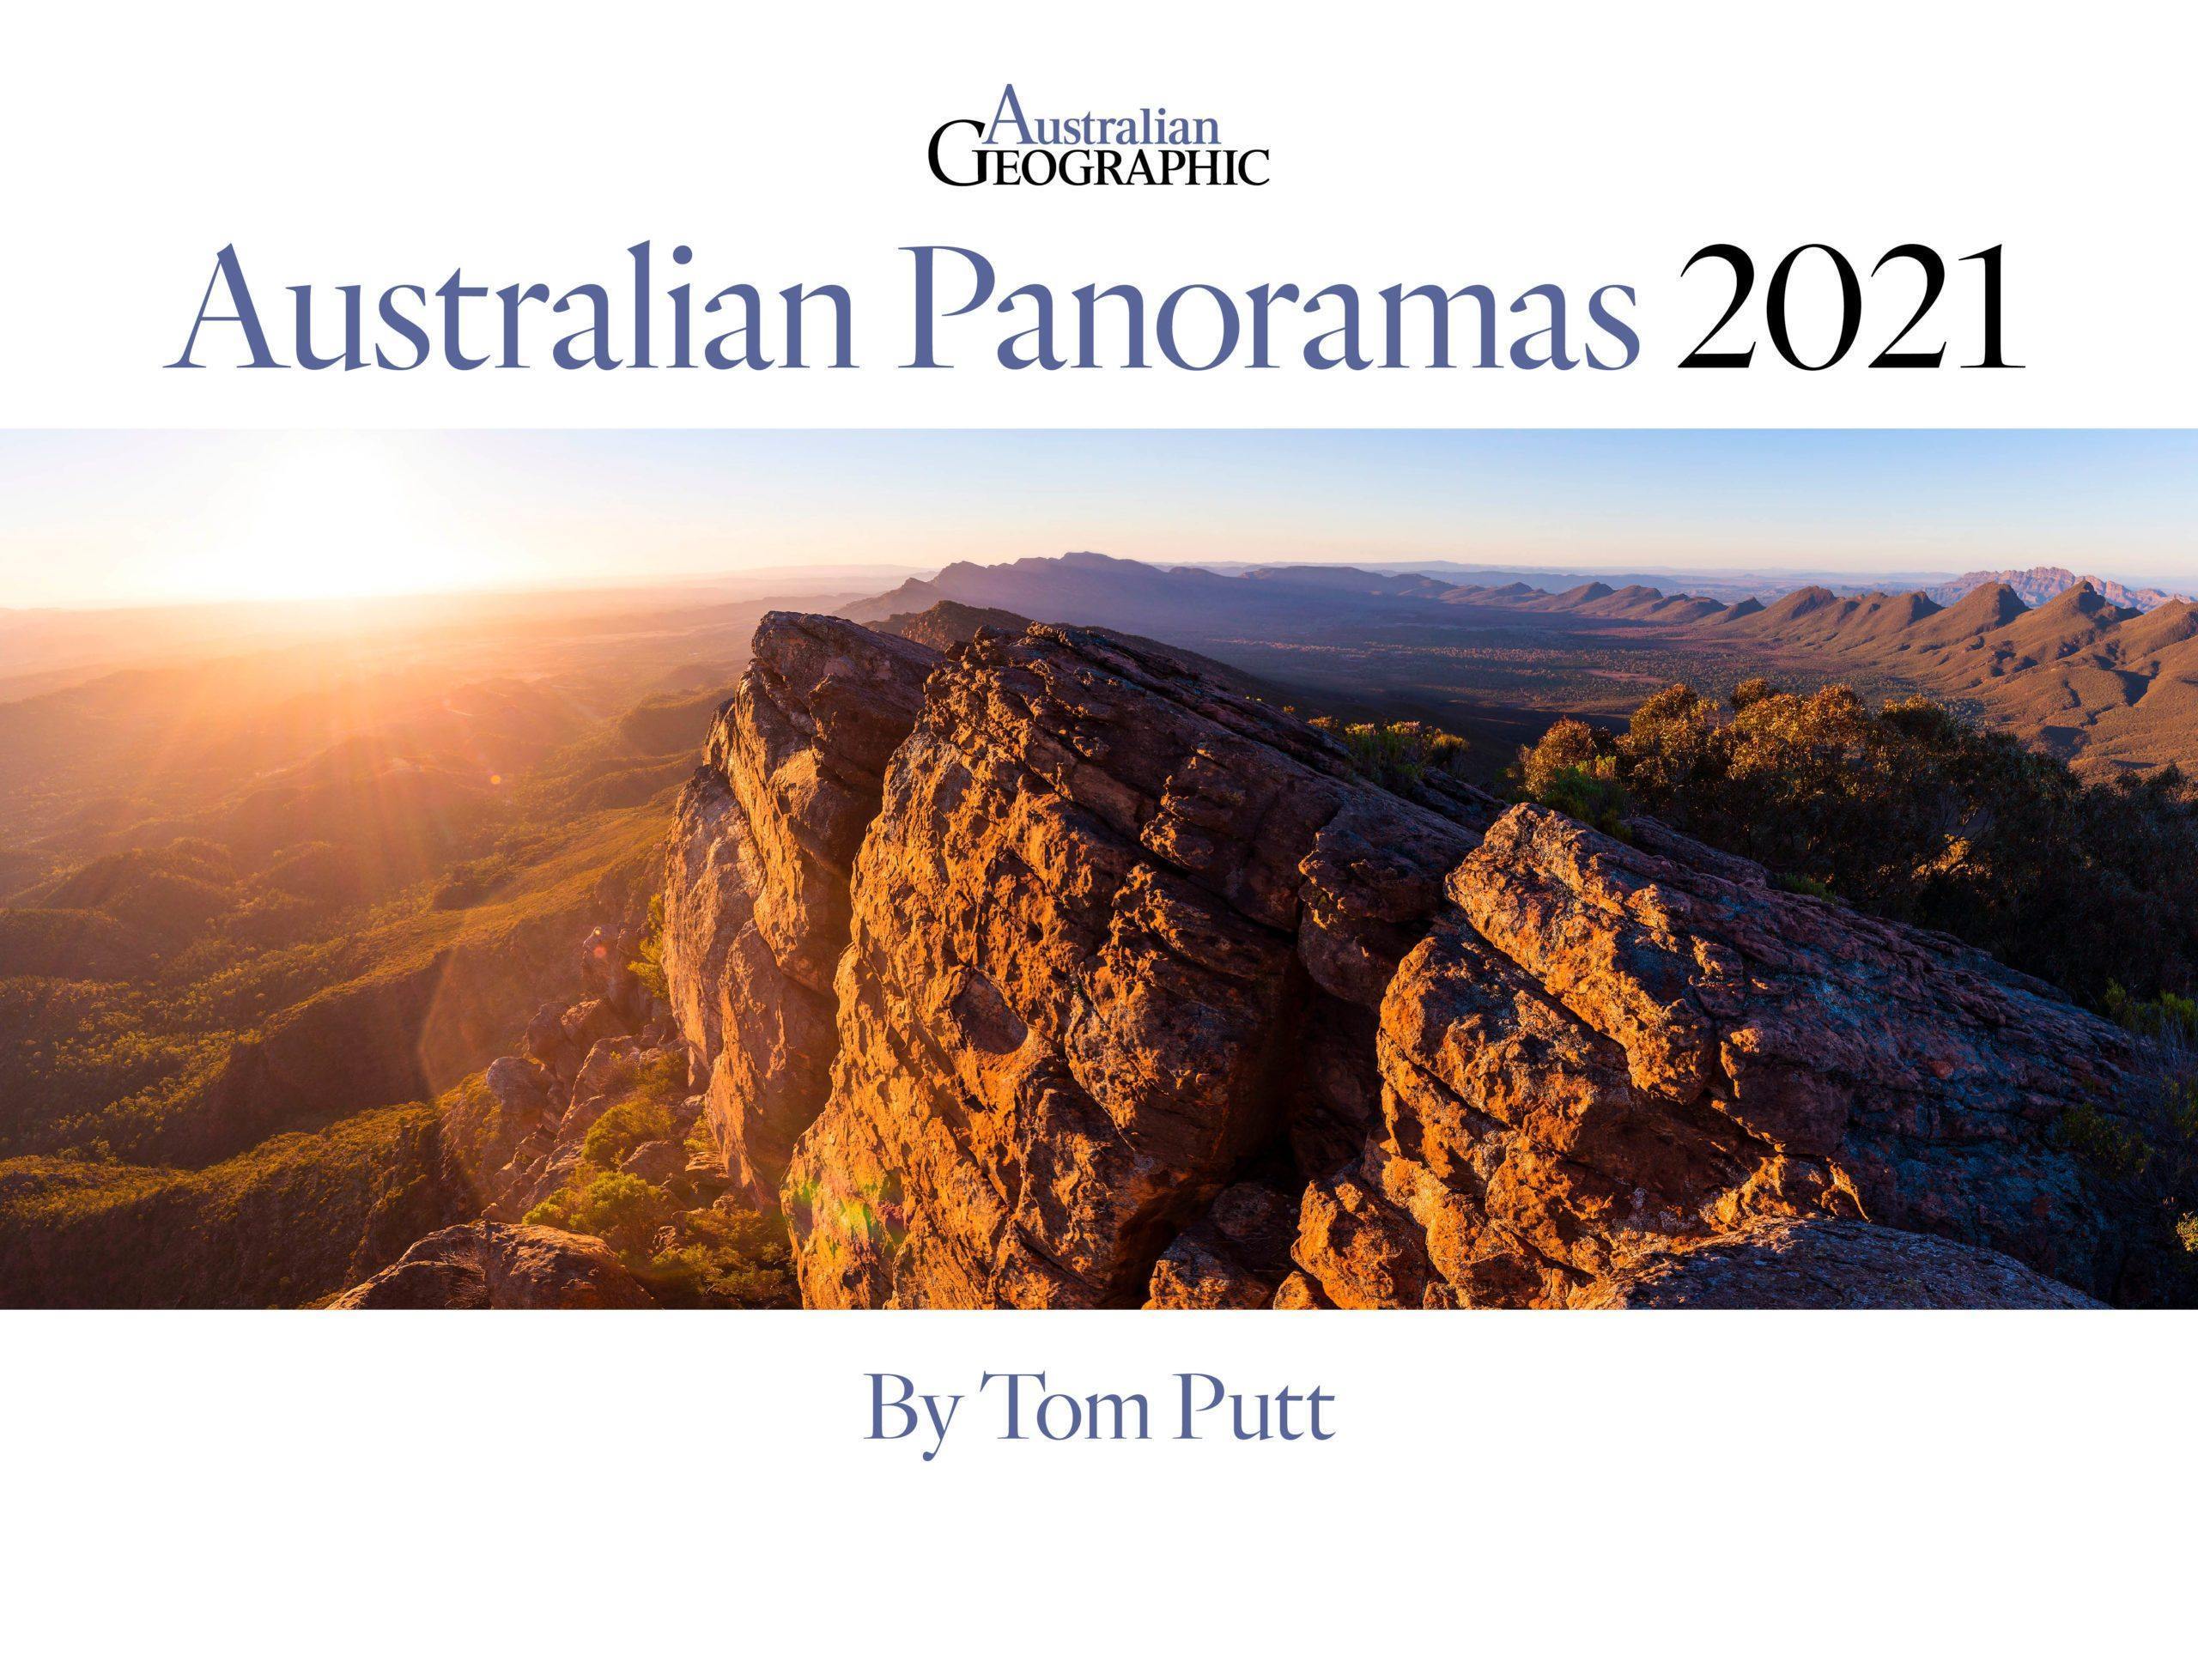 High cliff lines upon a lot of greenery and beautiful sunlight creating a hot blur effect in the scene, Australian Geographic Panoramas Calendar 2021